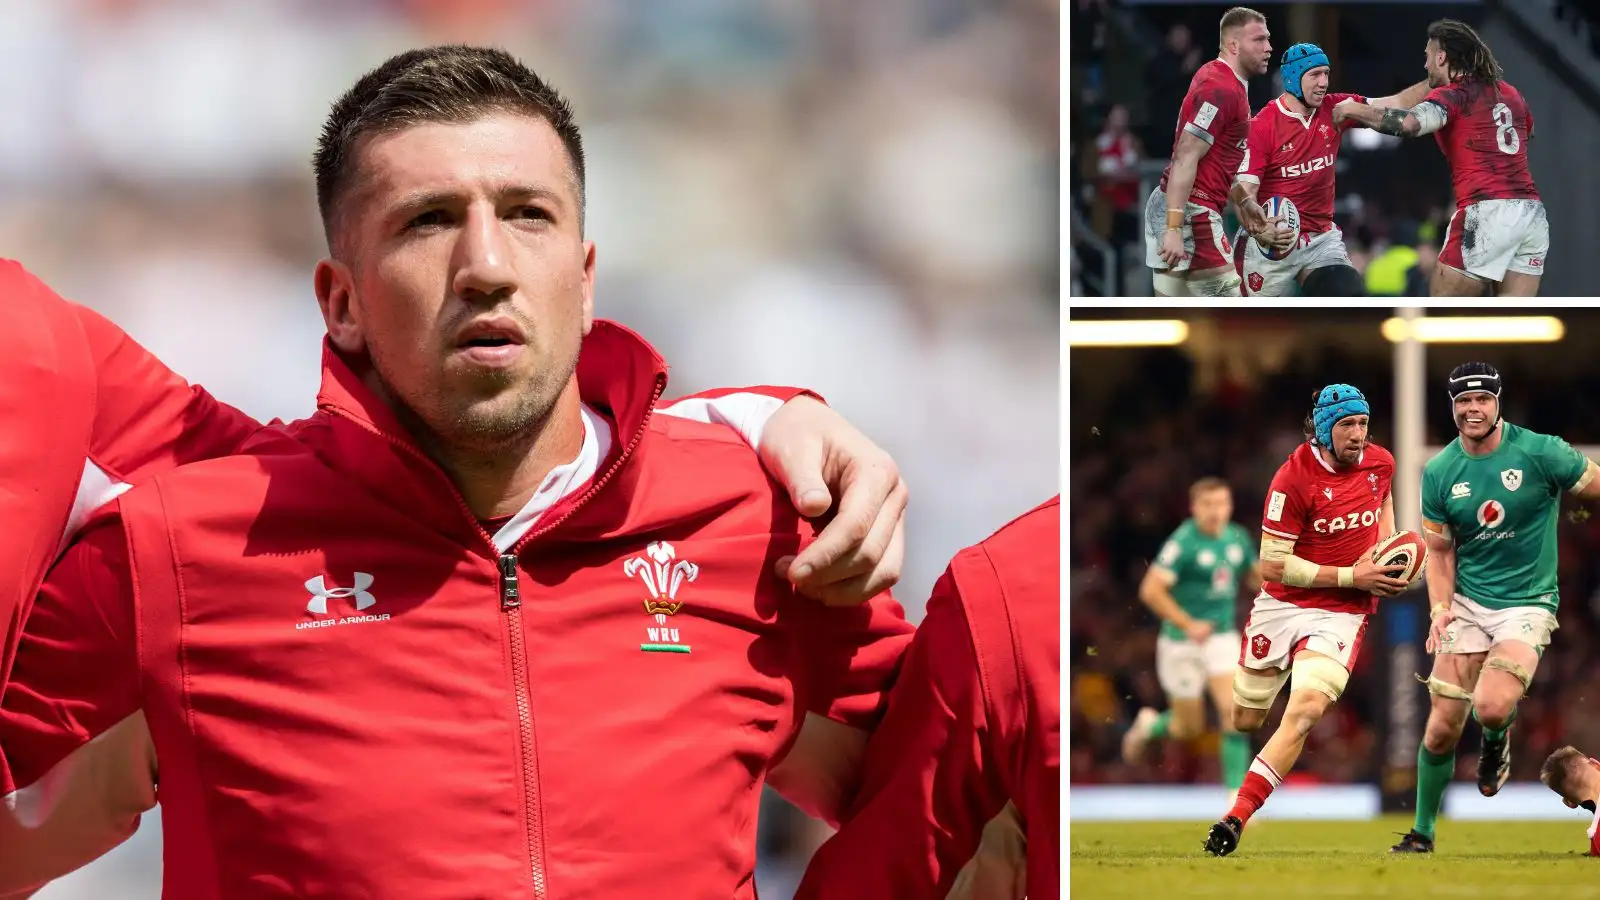 Flanker Justin Tipuric has retired from international rugby just four months before Wales kick off their Rugby World Cup campaign.